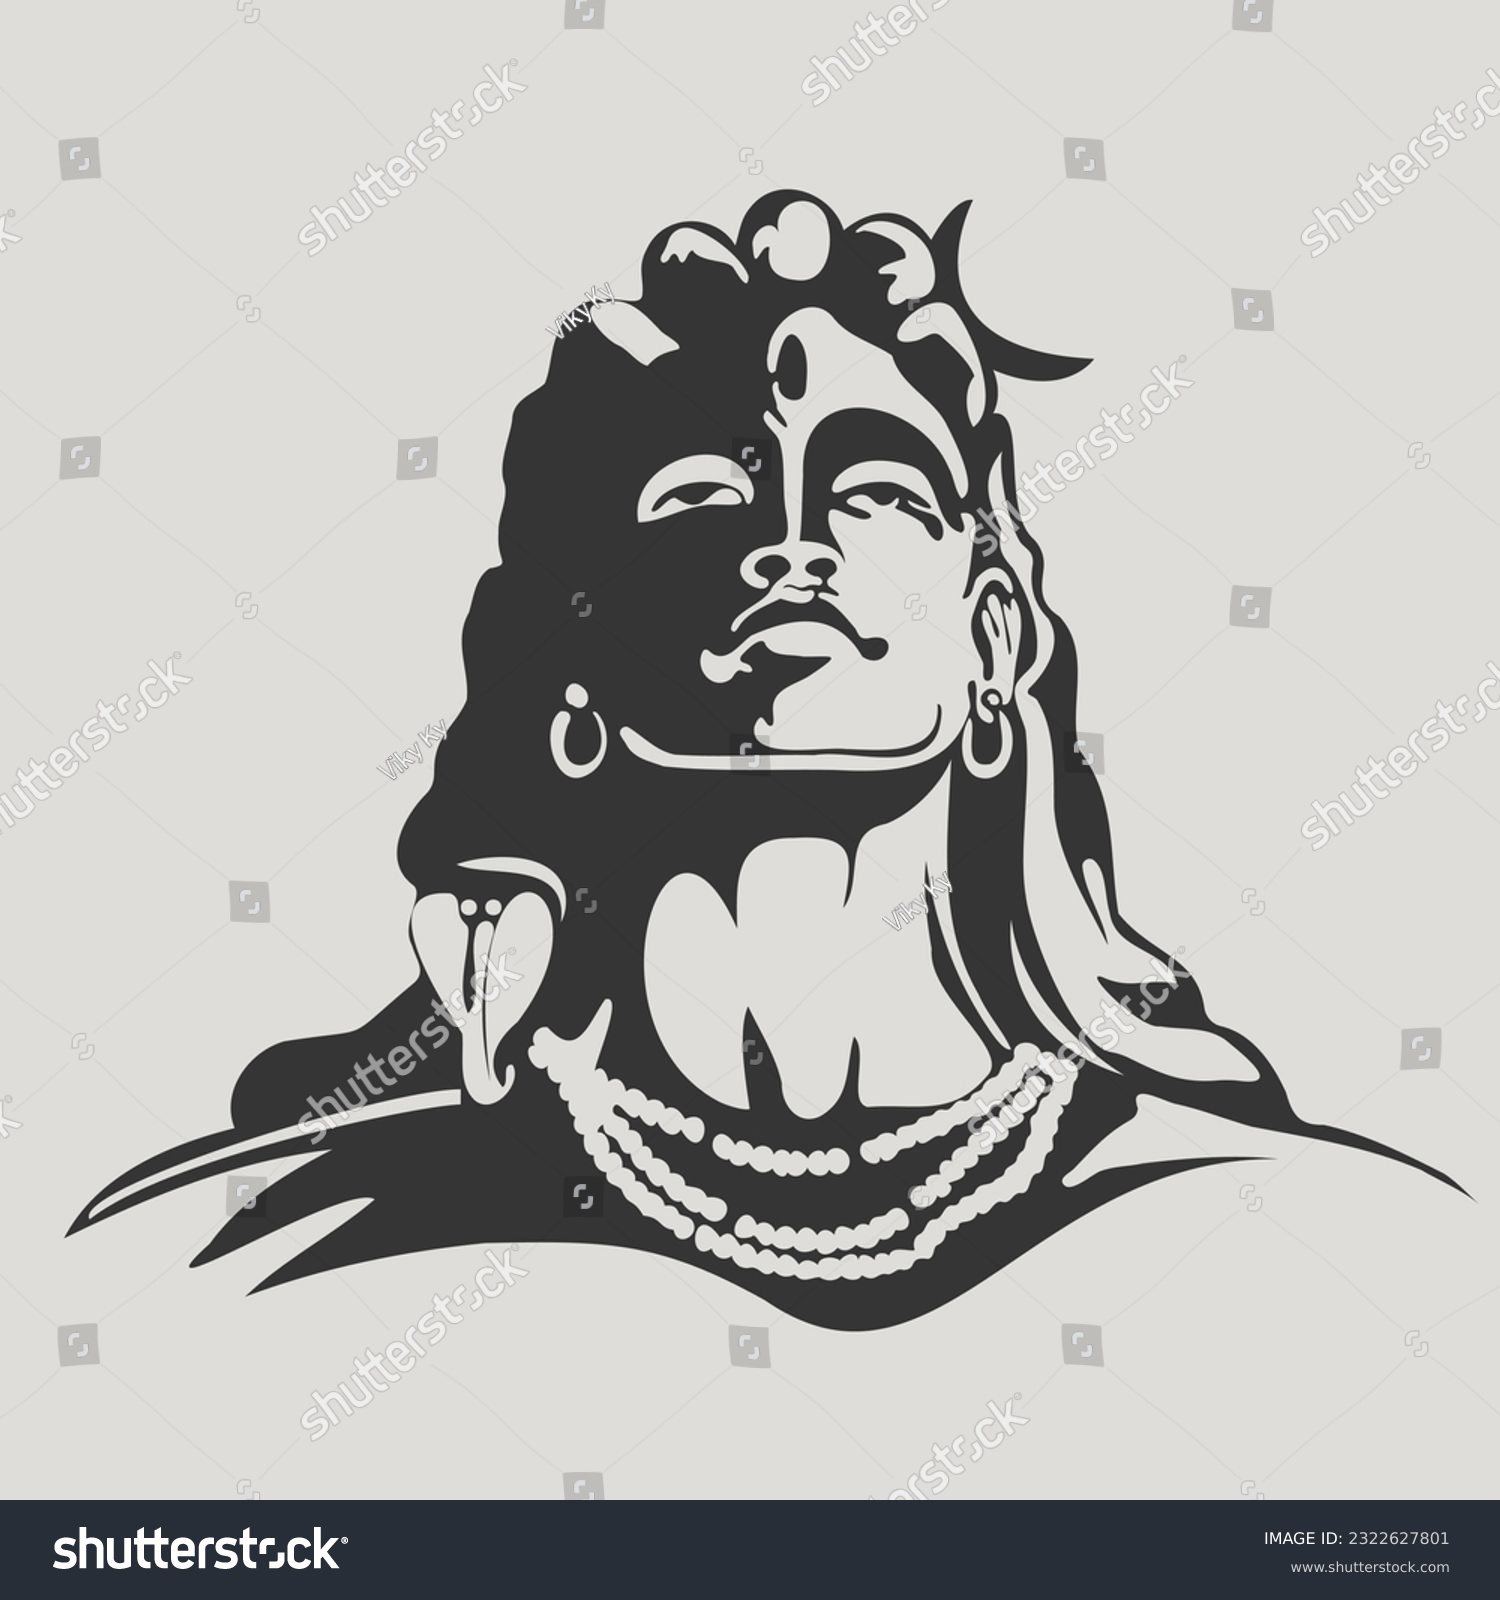 SVG of lord shiva digital vector wall sticker isolated on gray background   svg